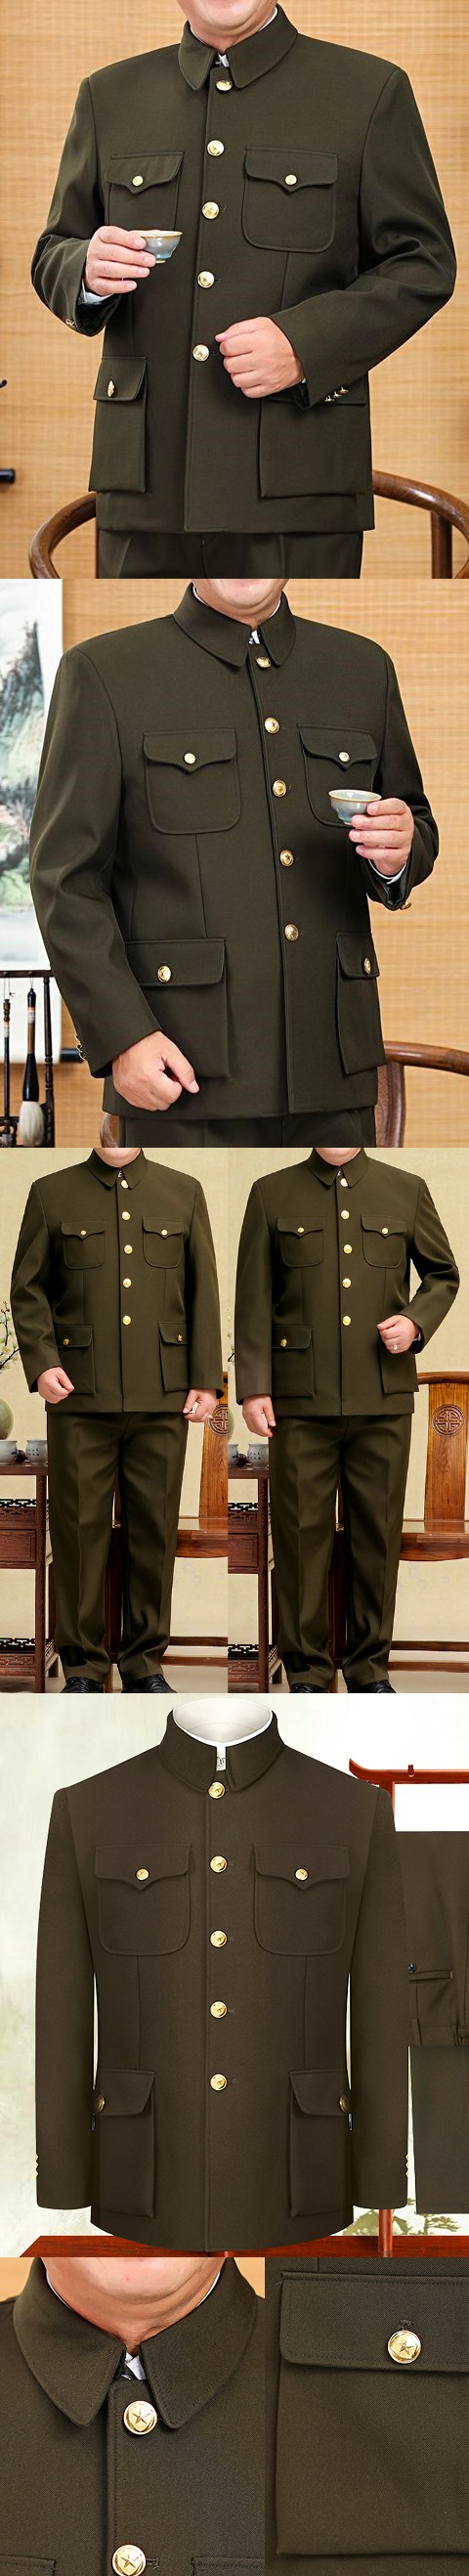 Classic Military Officer Style Mao Jacket (RM)